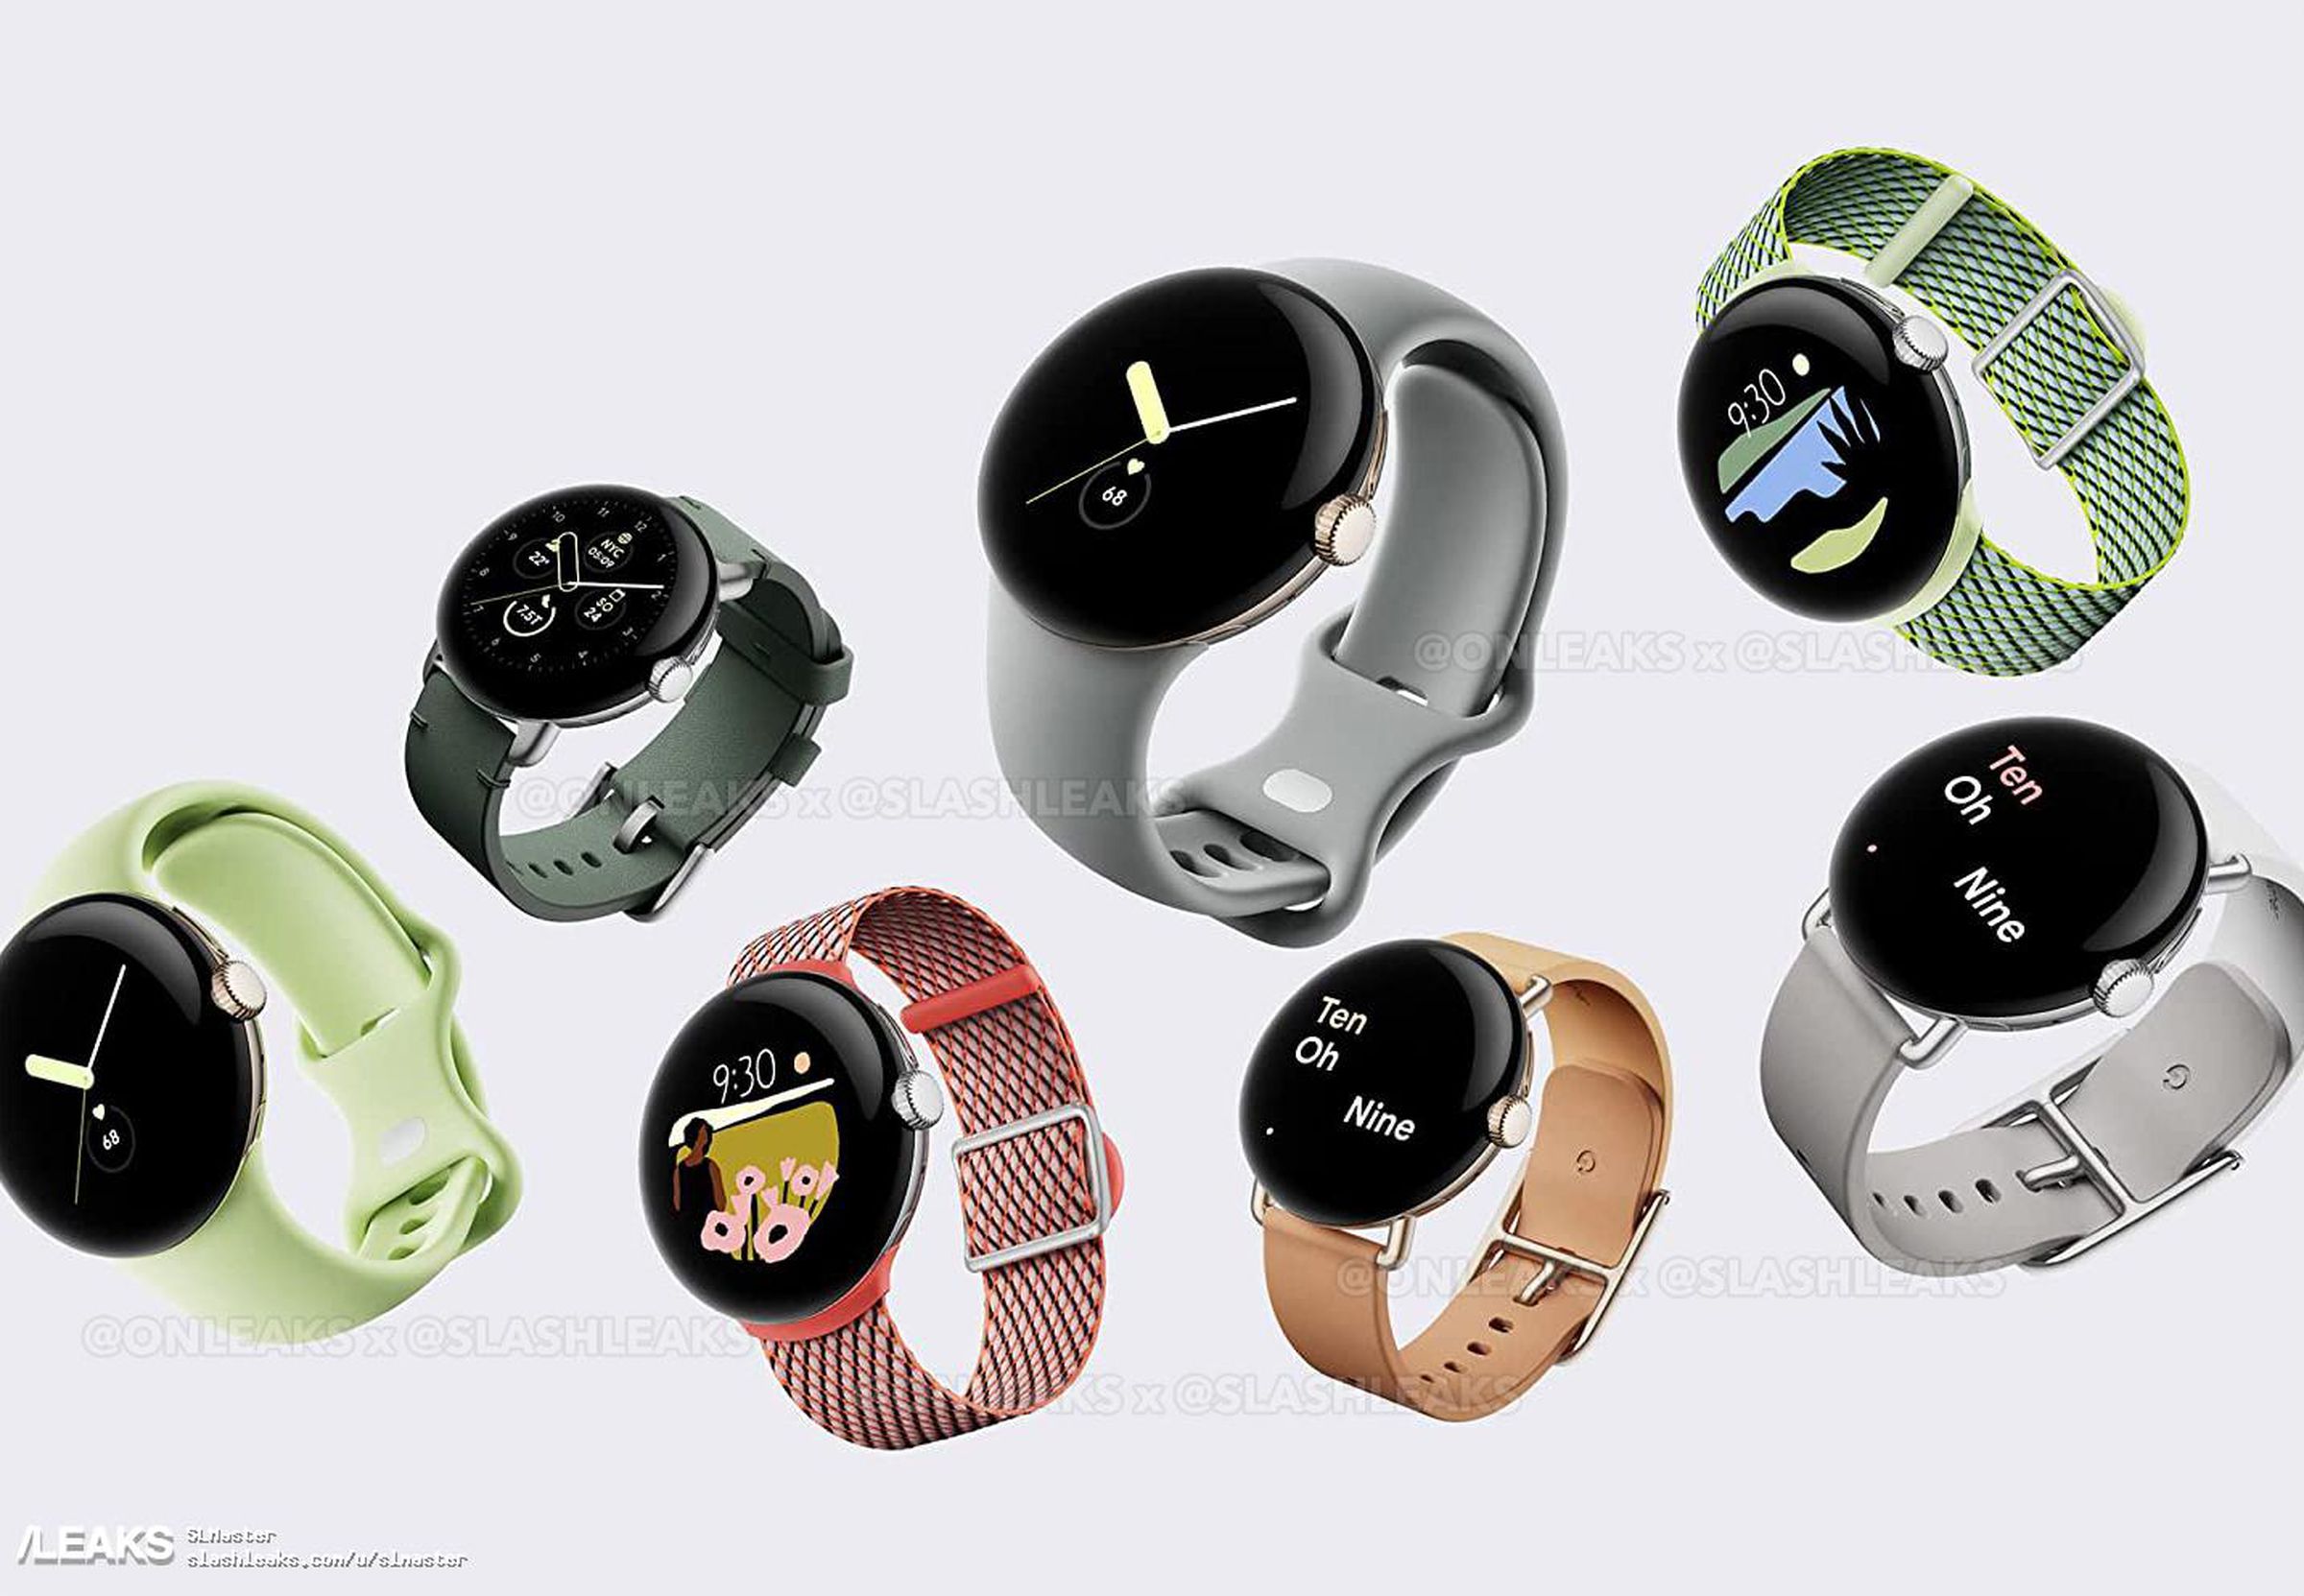 A leaked image showing a variety of Pixel Watches with different bands and watch faces